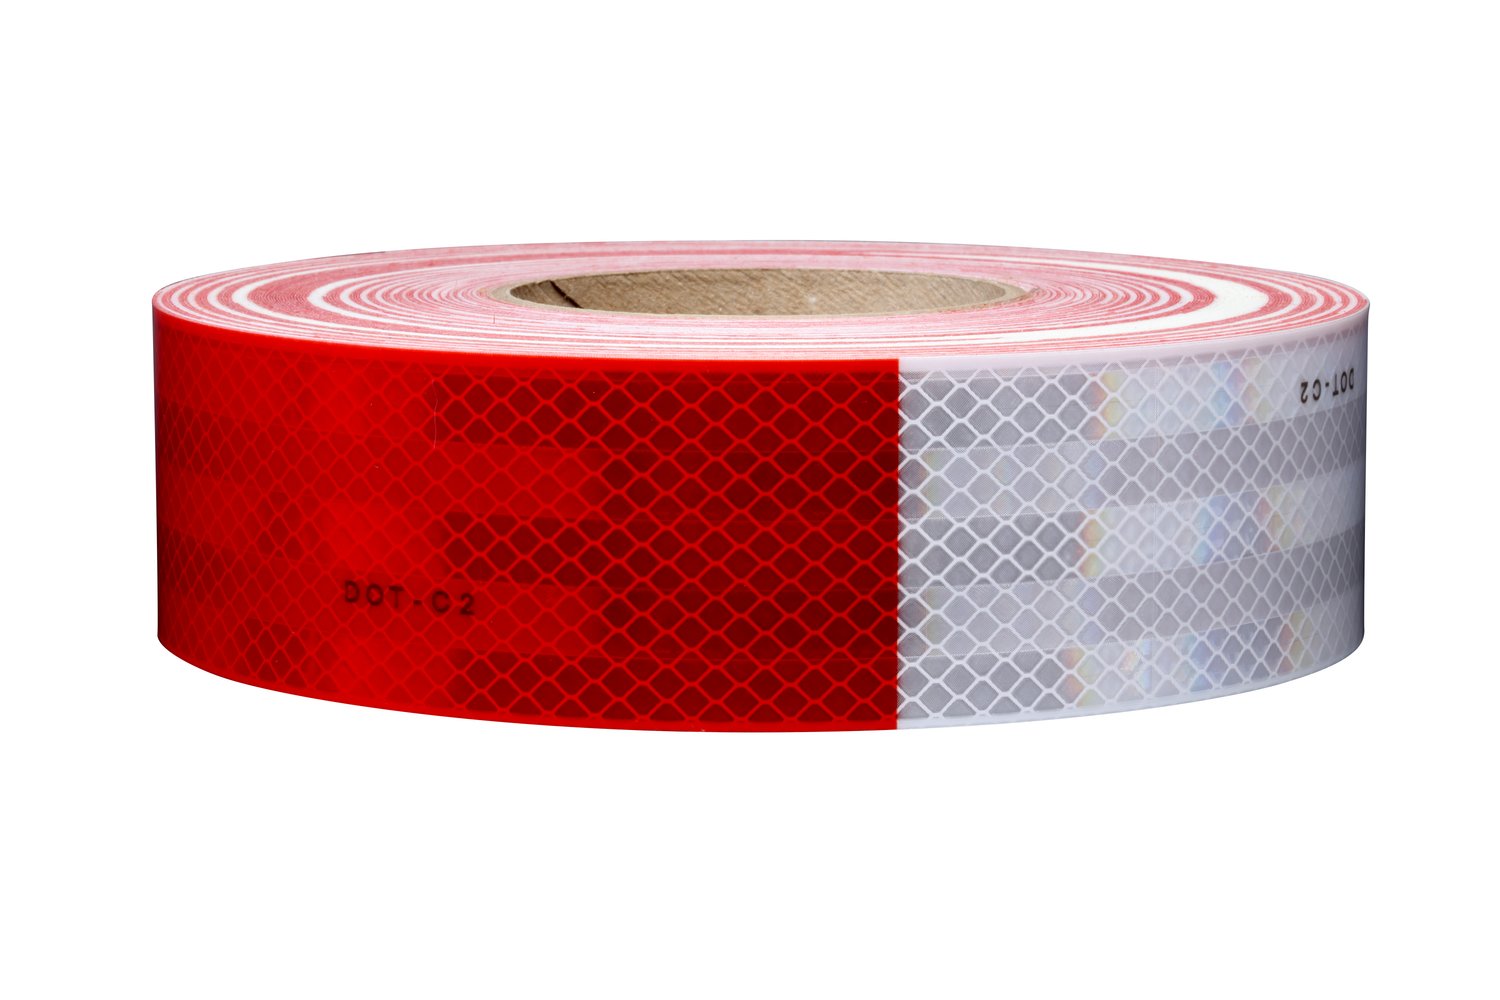 7100139512 - 3M Diamond Grade Conspicuity Marking Roll 983-32, Red/White, 67764, 1 1/2 in x 50 yd, 1 Roll/Case